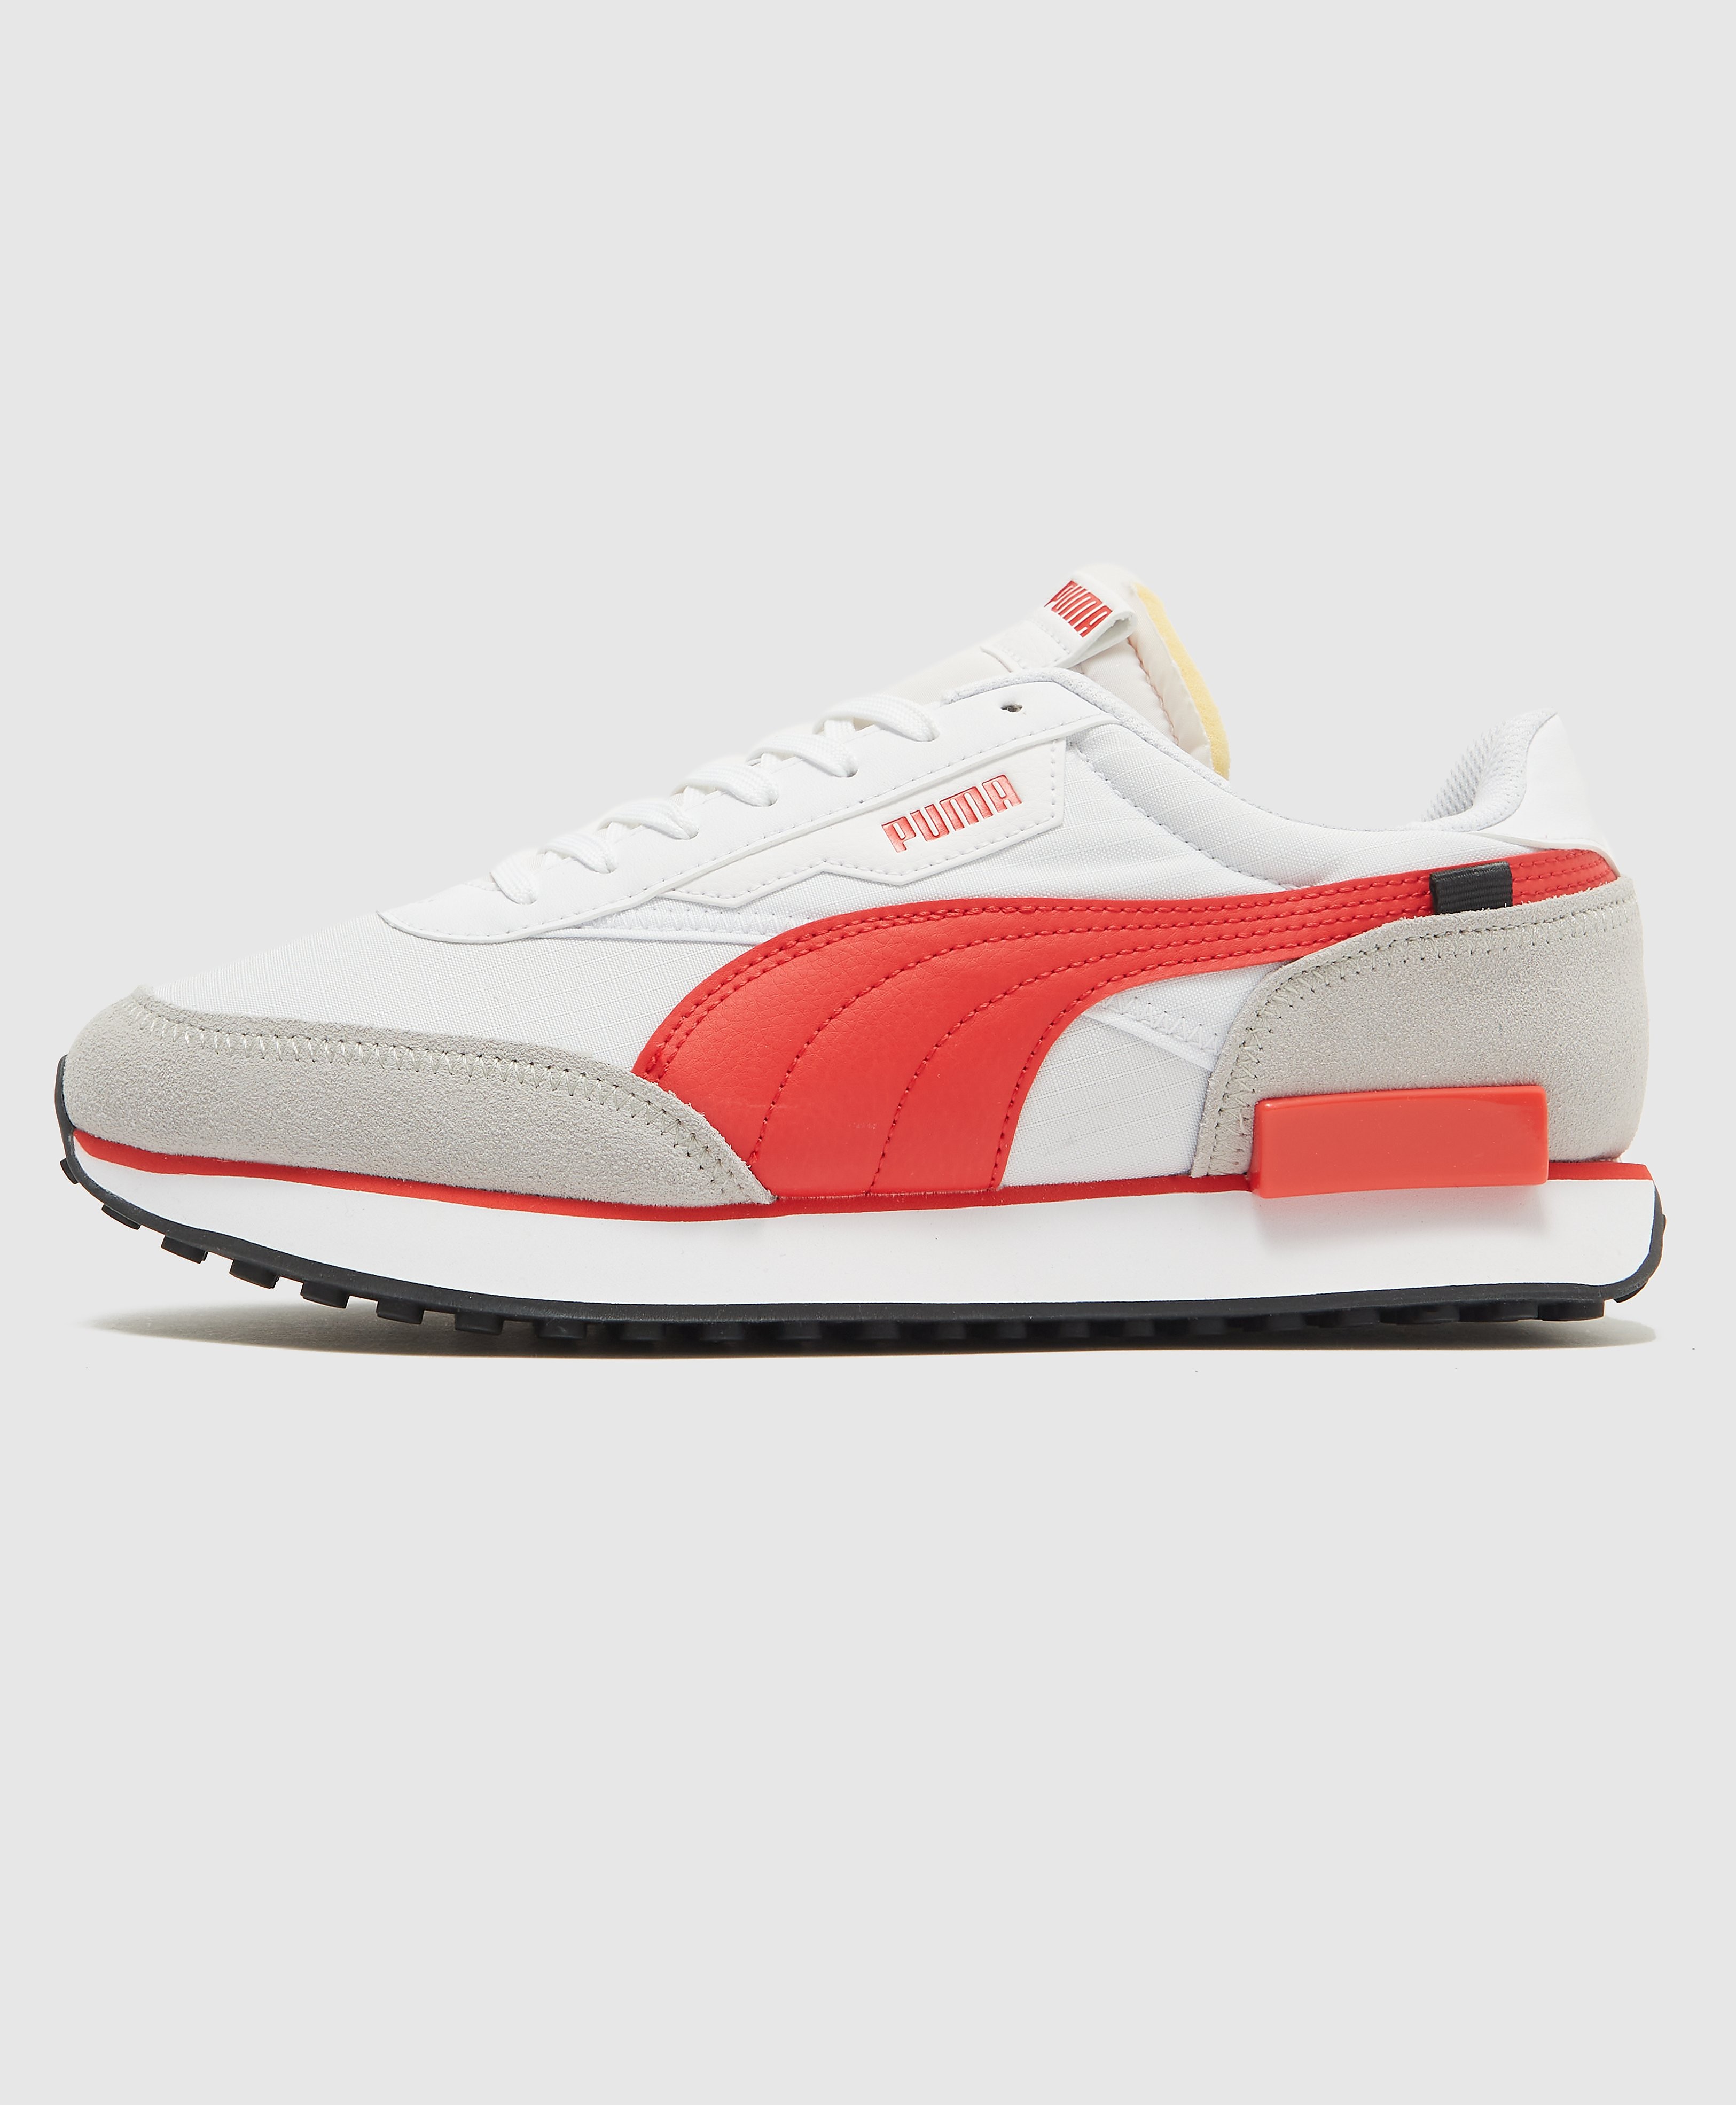 Puma Men's Future Rider Play On Trainers - White/Red, White/Red